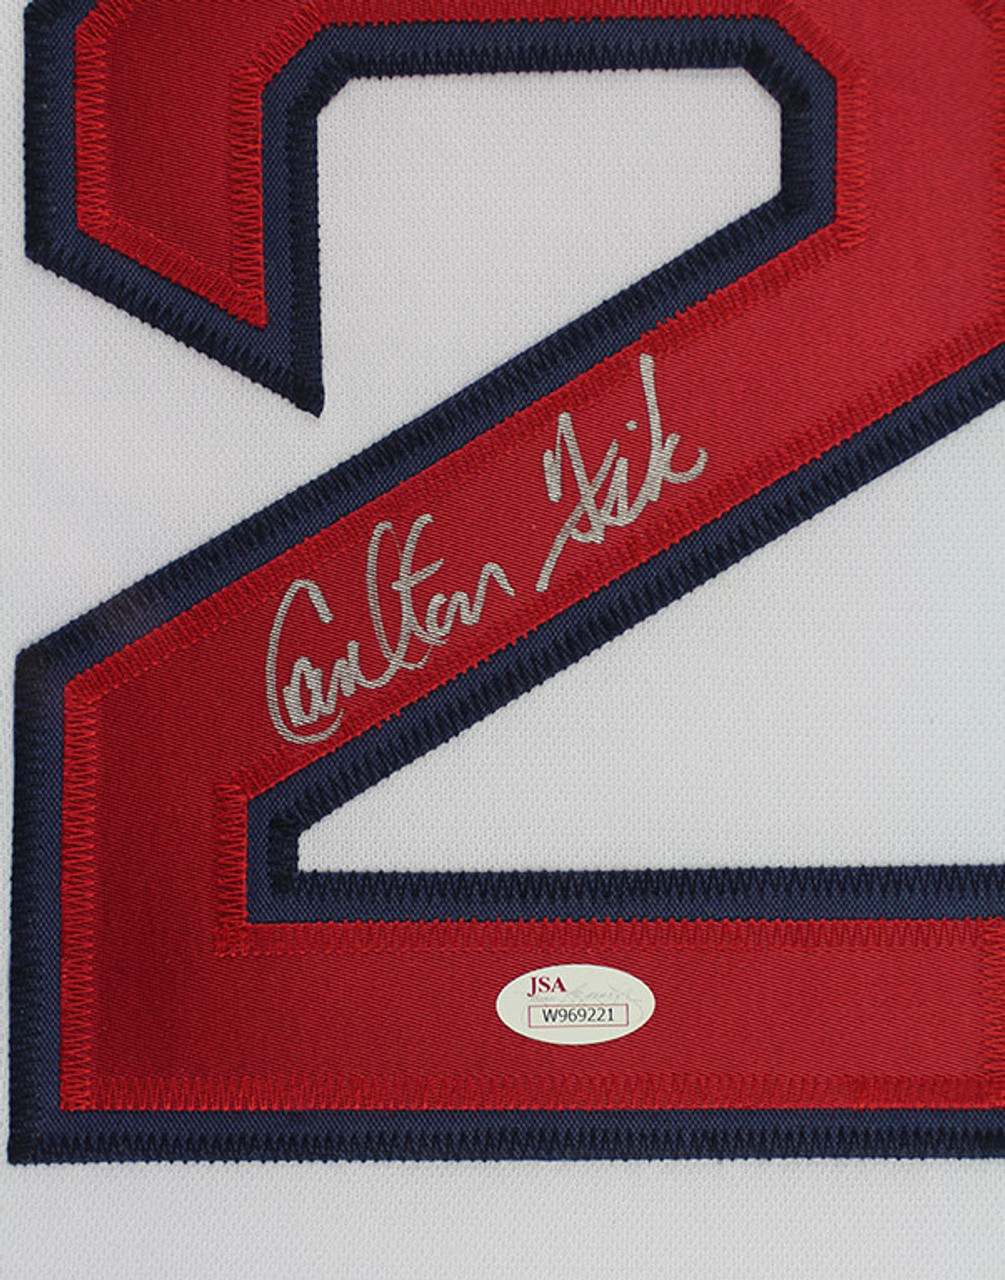 Carlton Fisk Autographed and Framed White Pinstripe Red Sox Jersey